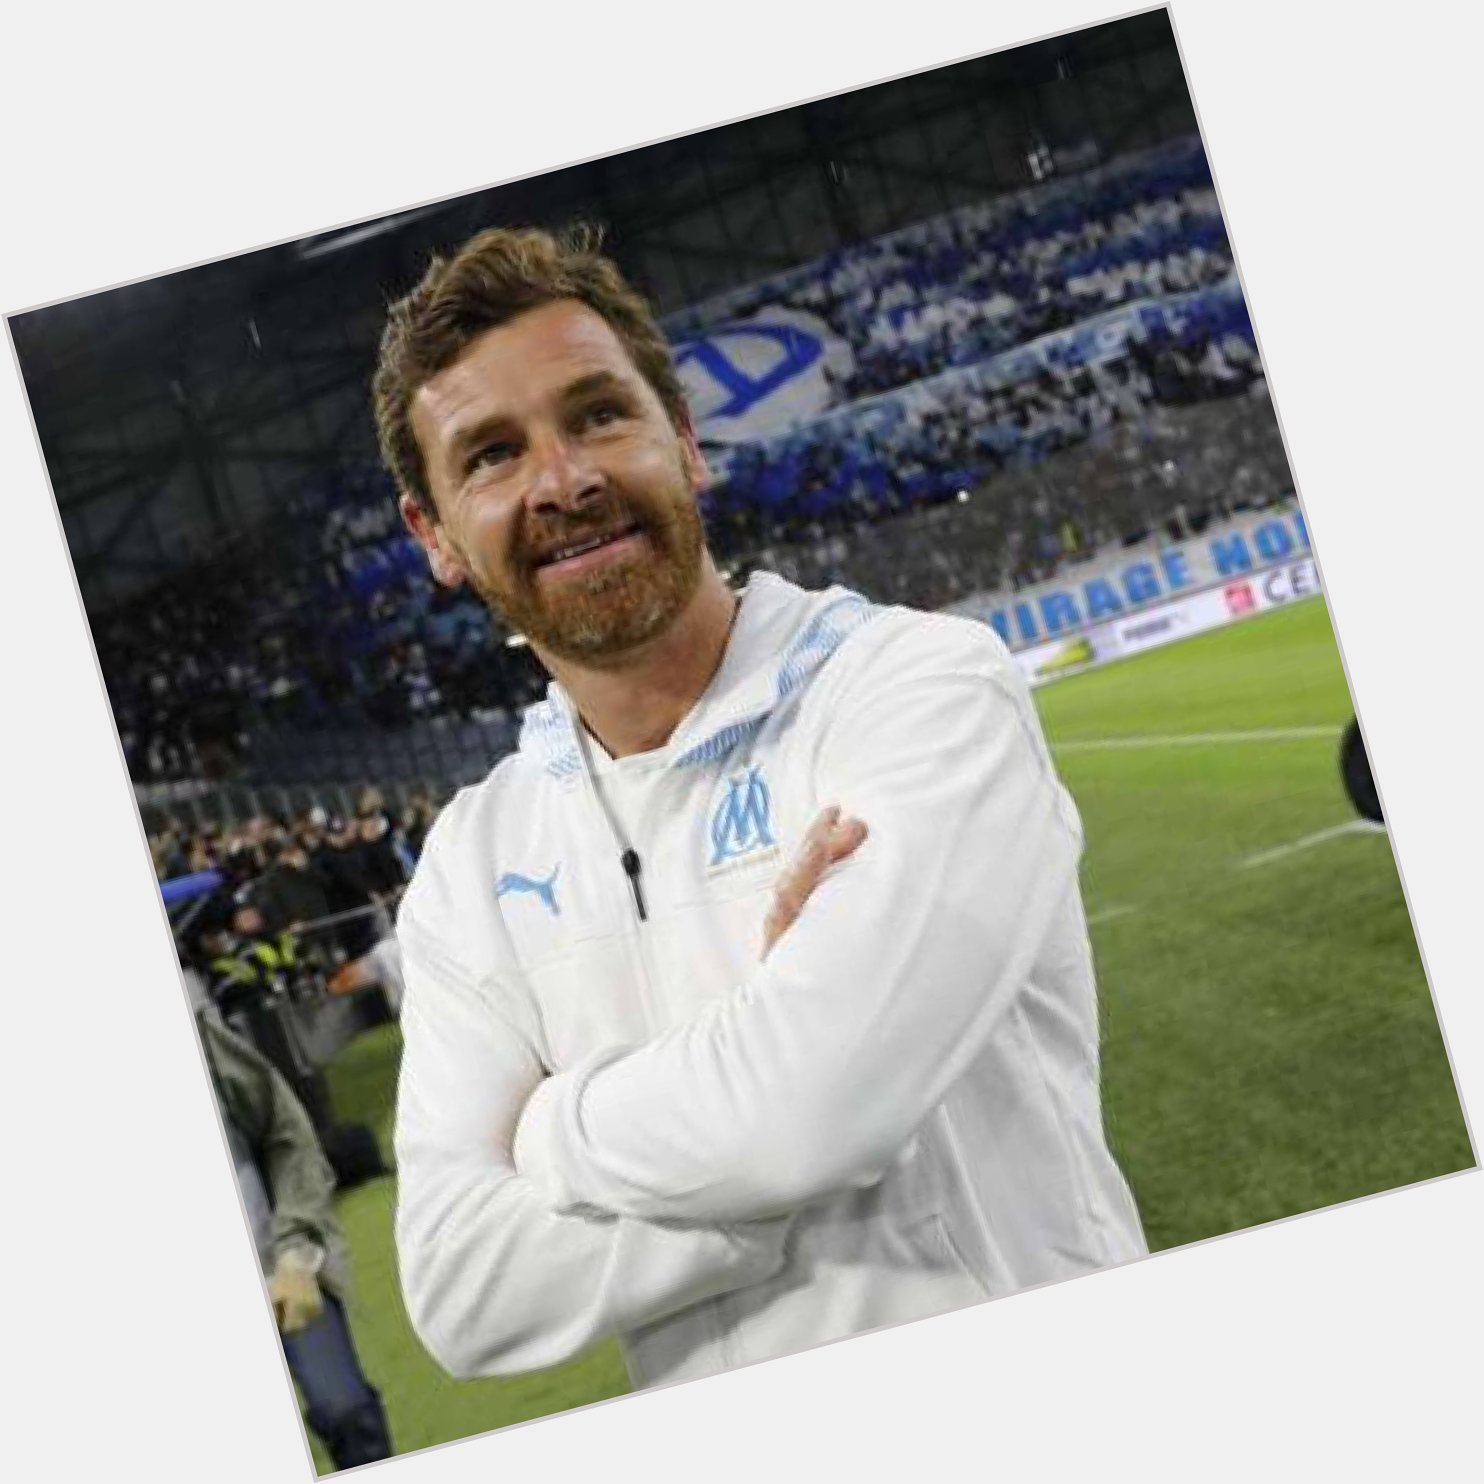 Wishing a very happy birthday to mr André Villas-Boas. May you celebrate it with a win 